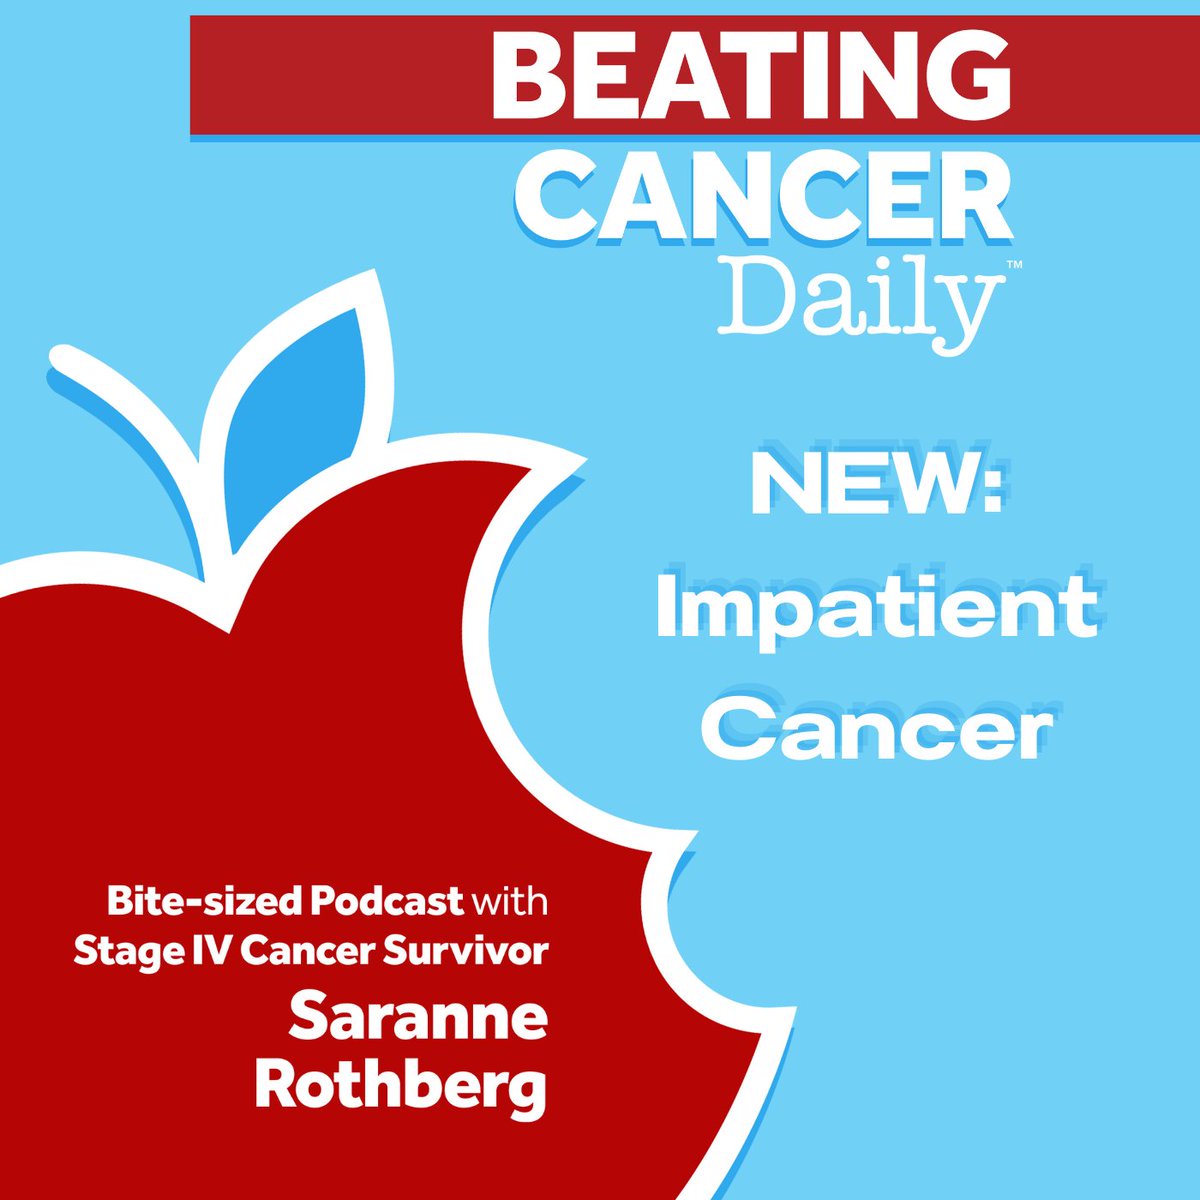 Today on #BeatingCancerDaily, Fan Favorite: Impatient Cancer
Listen wherever you listen to podcasts. 
ComedyCures.org

#ComedyCures #LaughDaily #InstaLaugh #laughtherapy #NonProfit #nonprofitlife #standupcomedian #survivor #remission #cancersurvivor #cancertreatment